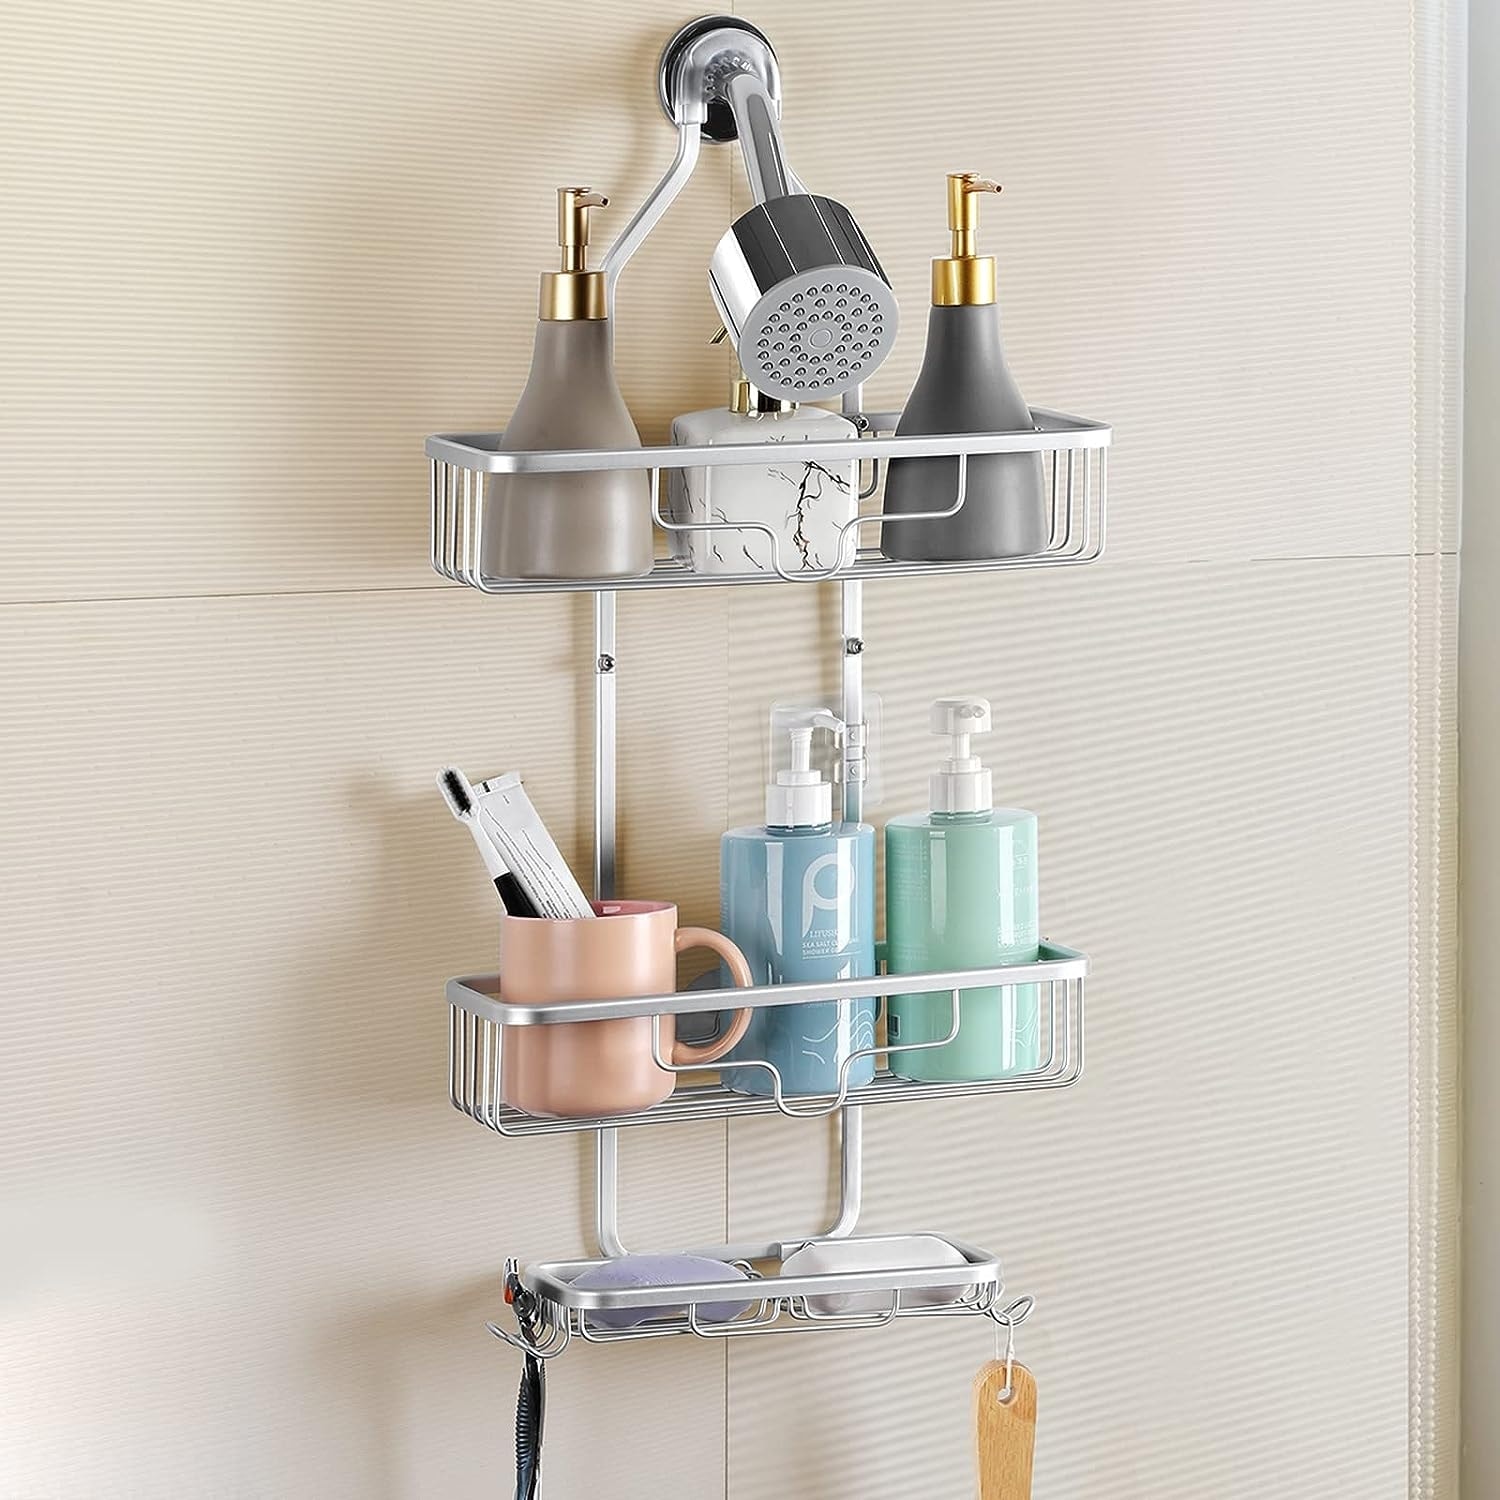 https://ak1.ostkcdn.com/images/products/is/images/direct/89ffa513a343187c87afe5cb0d5d55a822eb175c/3-Tier-Shower-Racks-with-Hooks-and-Shampoo-Soap-Razor-Holder.jpg